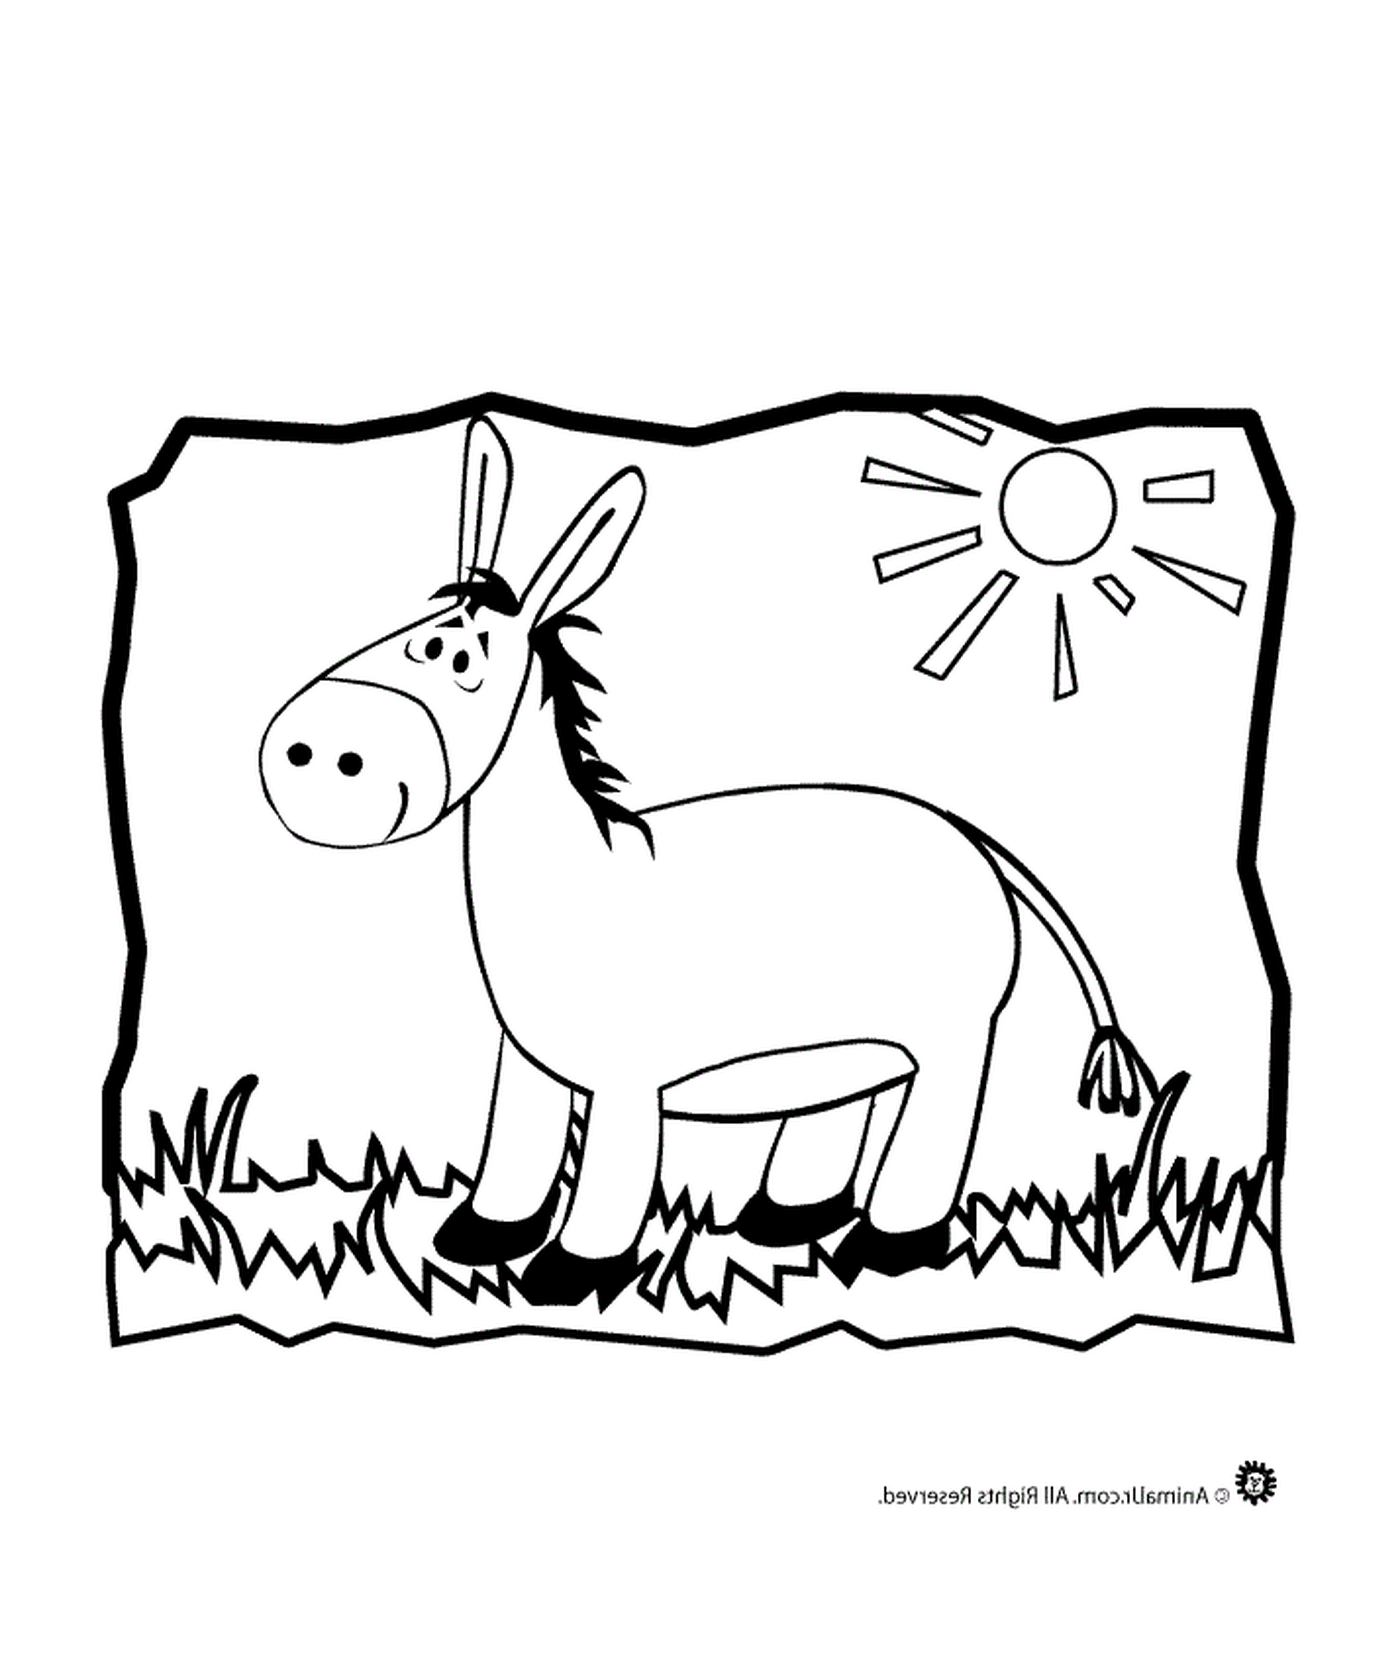  A donkey standing in a field 